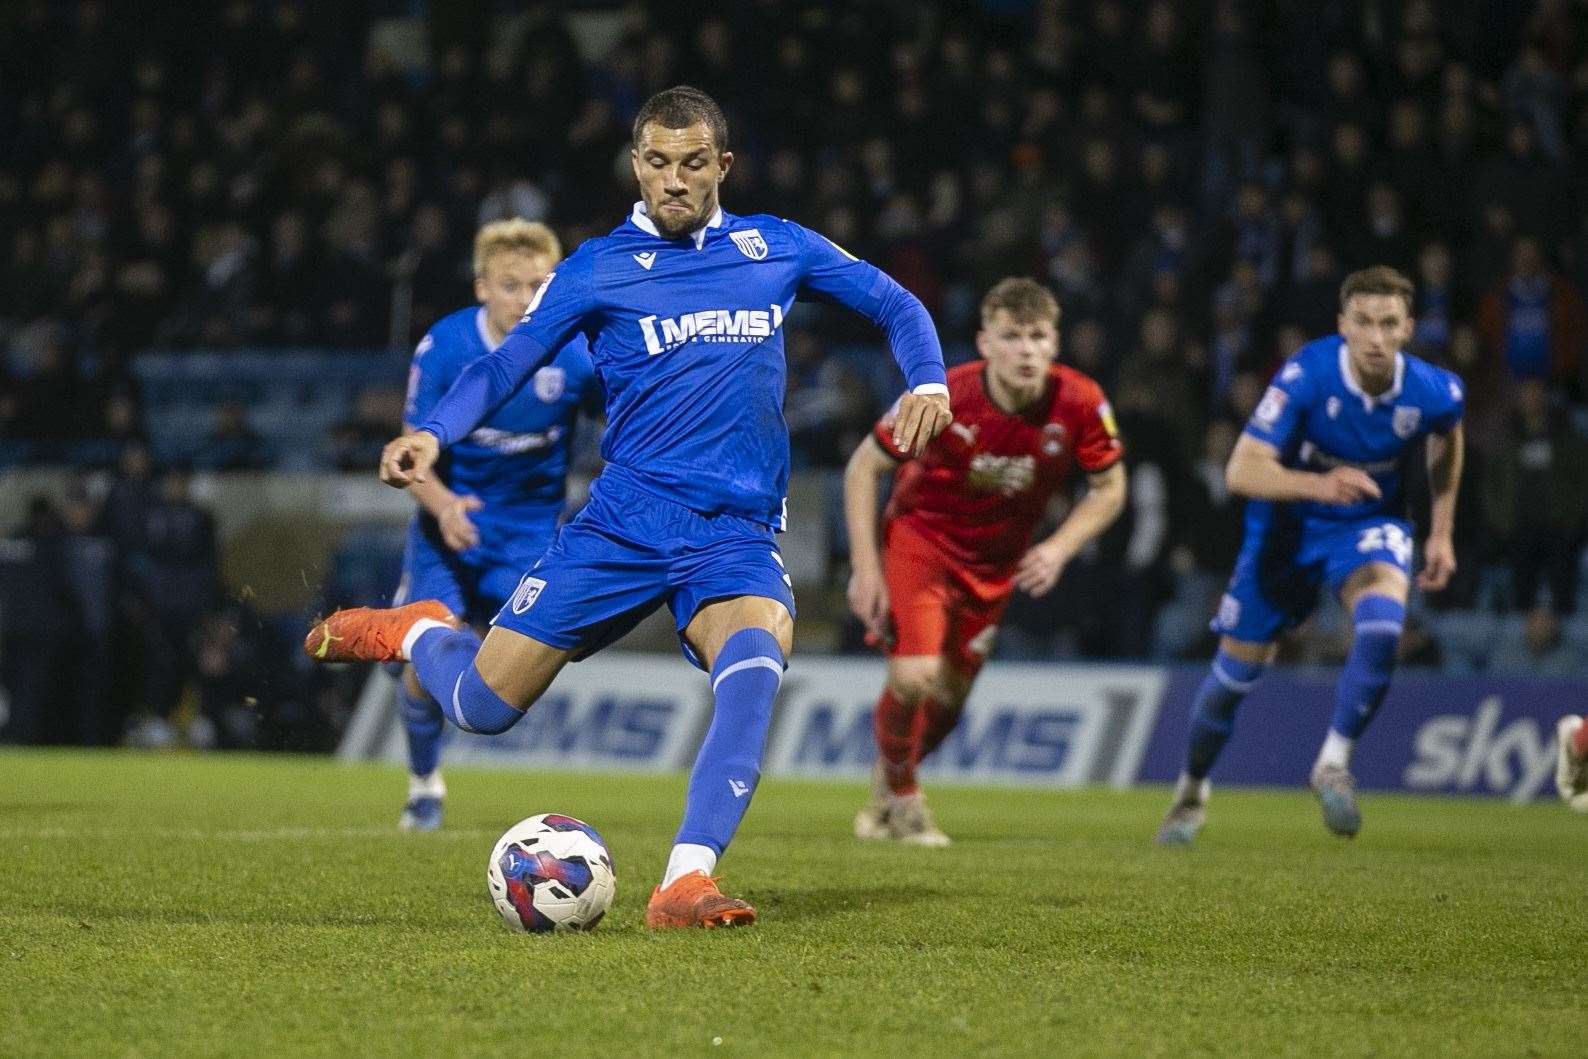 Cheye Alexander scores the second goal from the penalty spot for Gillingham